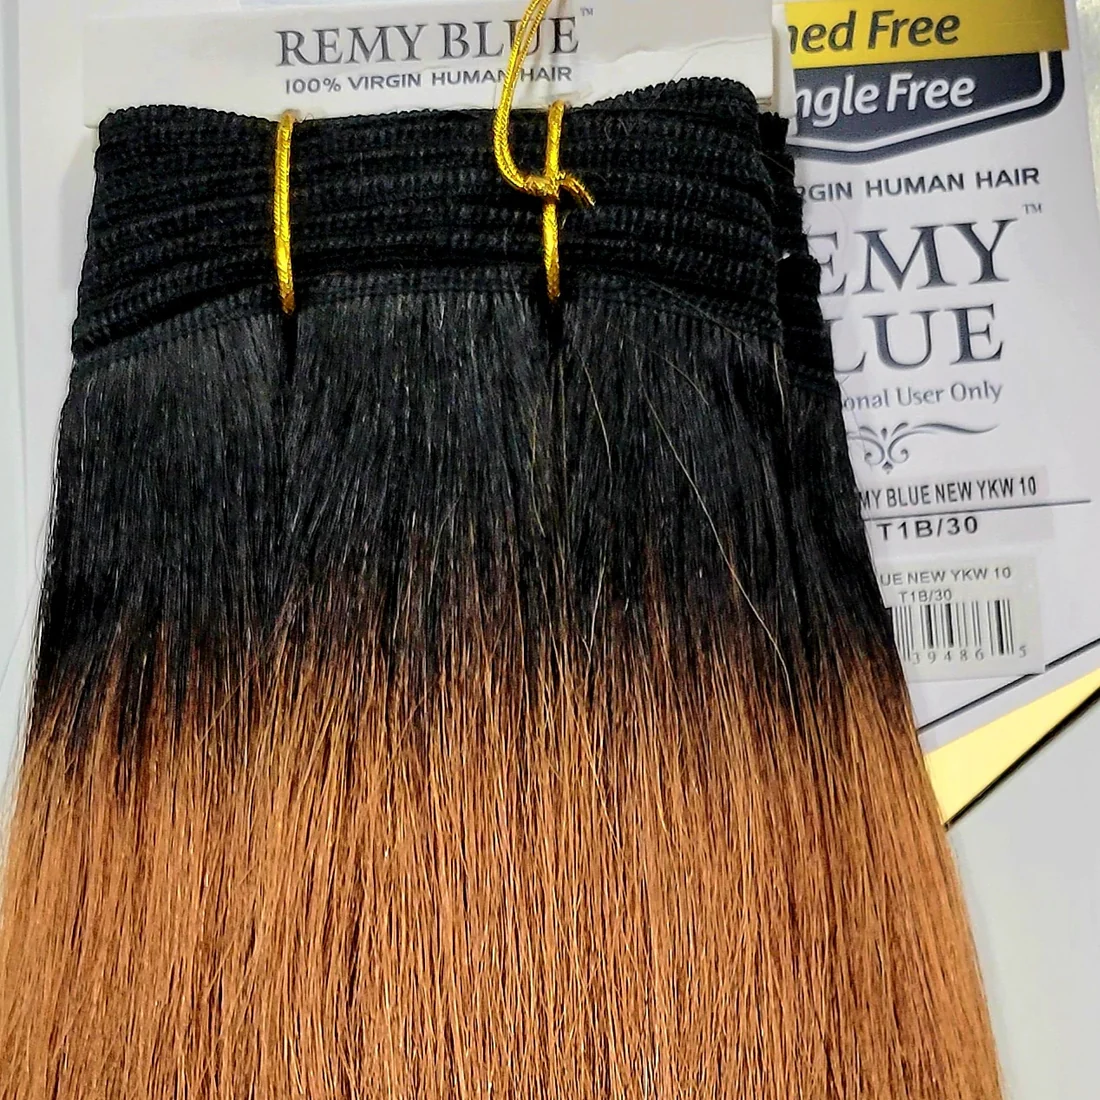 Remy Blue Human Hair New Yaky 18"